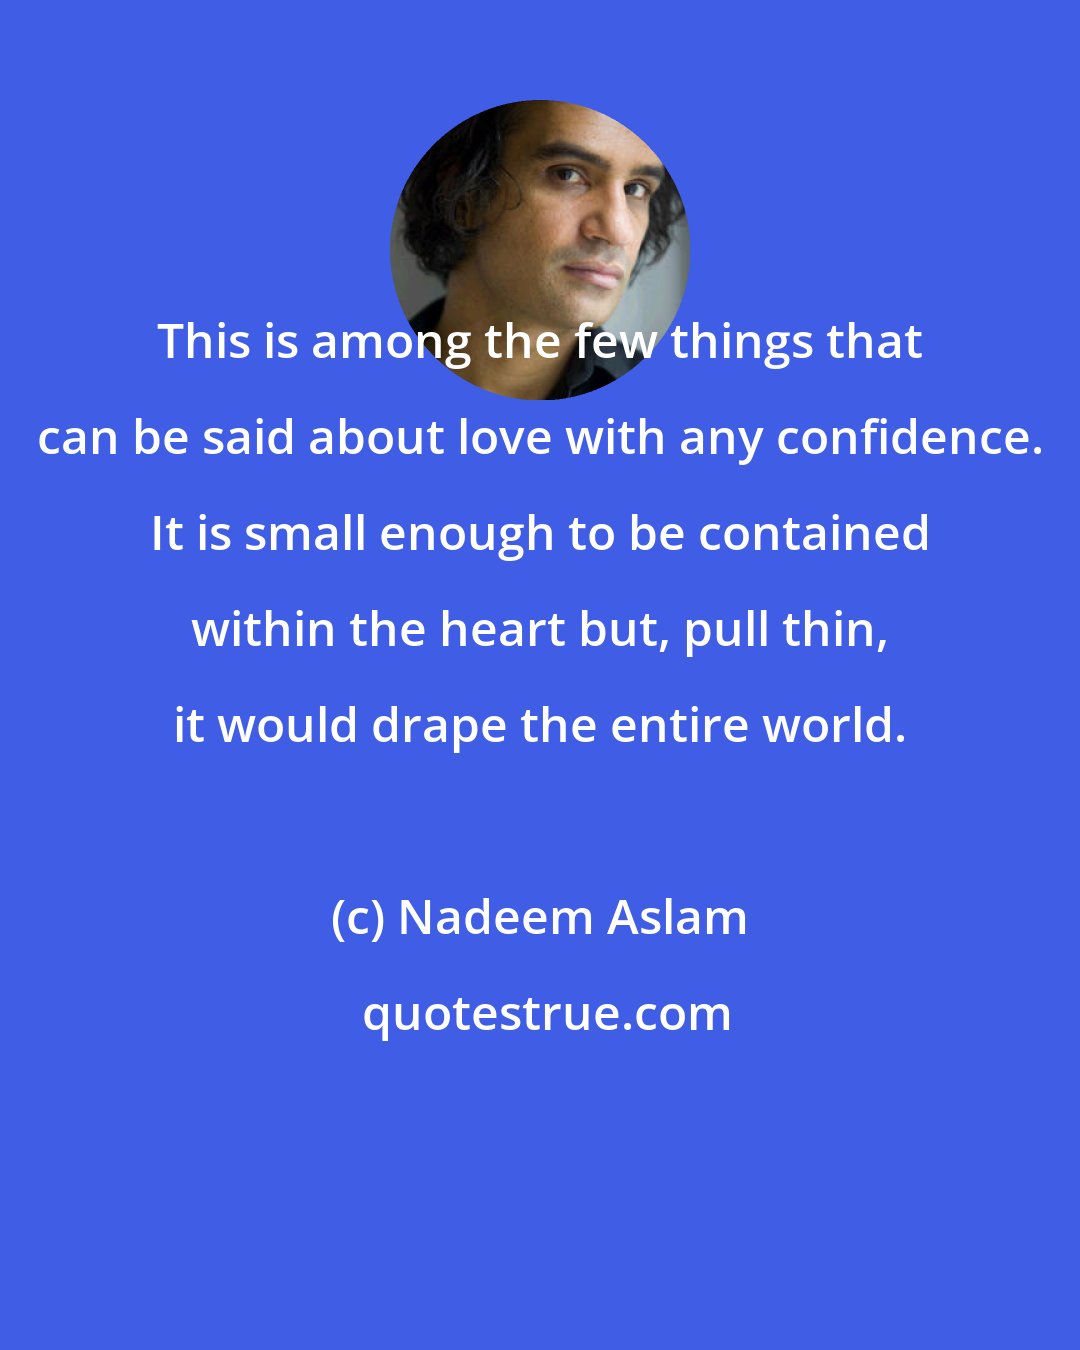 Nadeem Aslam: This is among the few things that can be said about love with any confidence. It is small enough to be contained within the heart but, pull thin, it would drape the entire world.